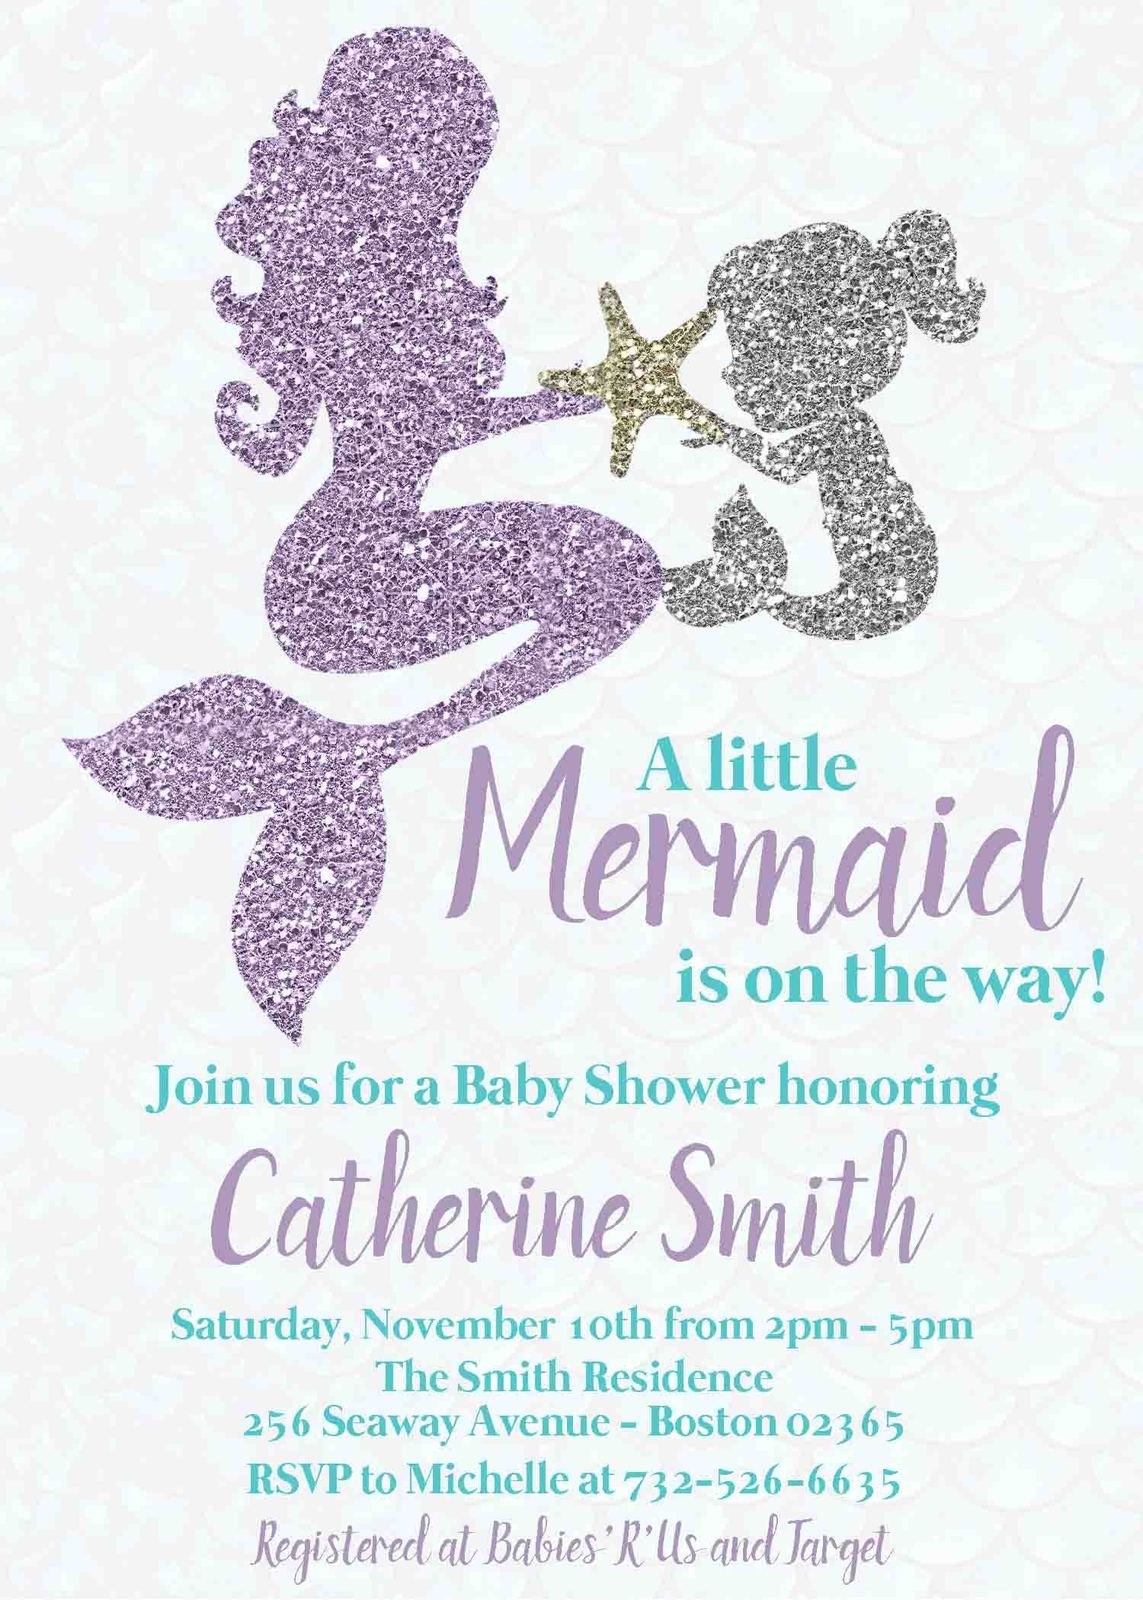 Full Size of Baby Shower:63+ Delightful Cheap Baby Shower Invitations Image Inspirations Cheap Baby Shower Invitations Mermaid Baby Shower Invitation Mother Baby Under The Sea Party Teal Teal And Lavender Glitter Mermaid Mother And Child Baby Shower Invitation